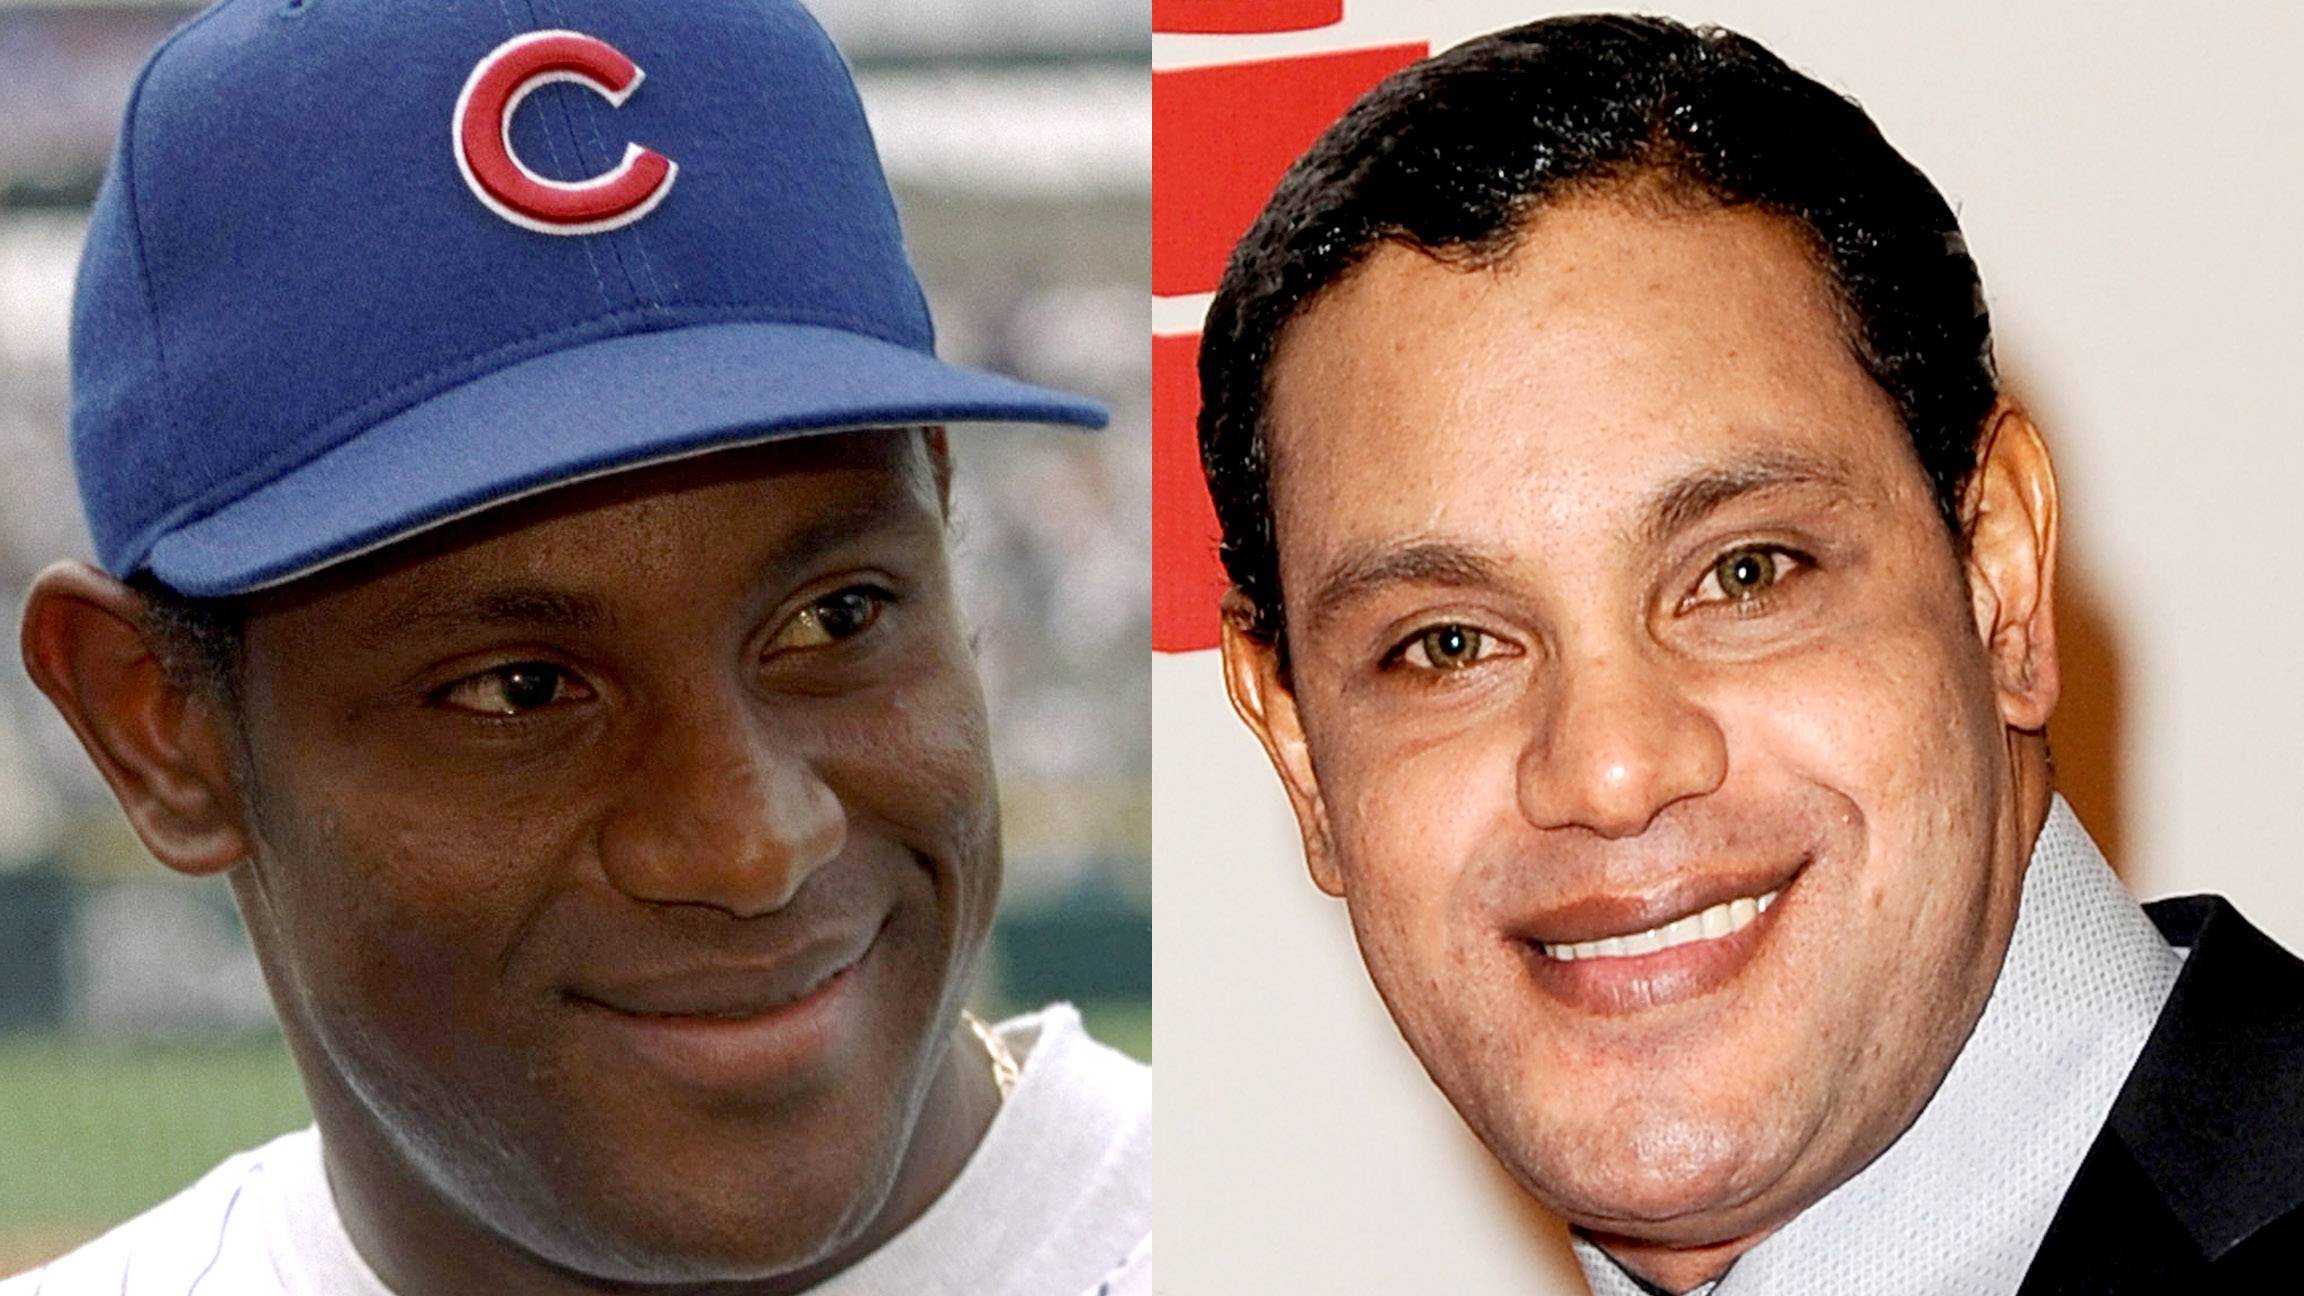 Sammy Sosa The Image 5 From 10 Celebs Who Have Been Accused Of Lightening Their Skin Bet